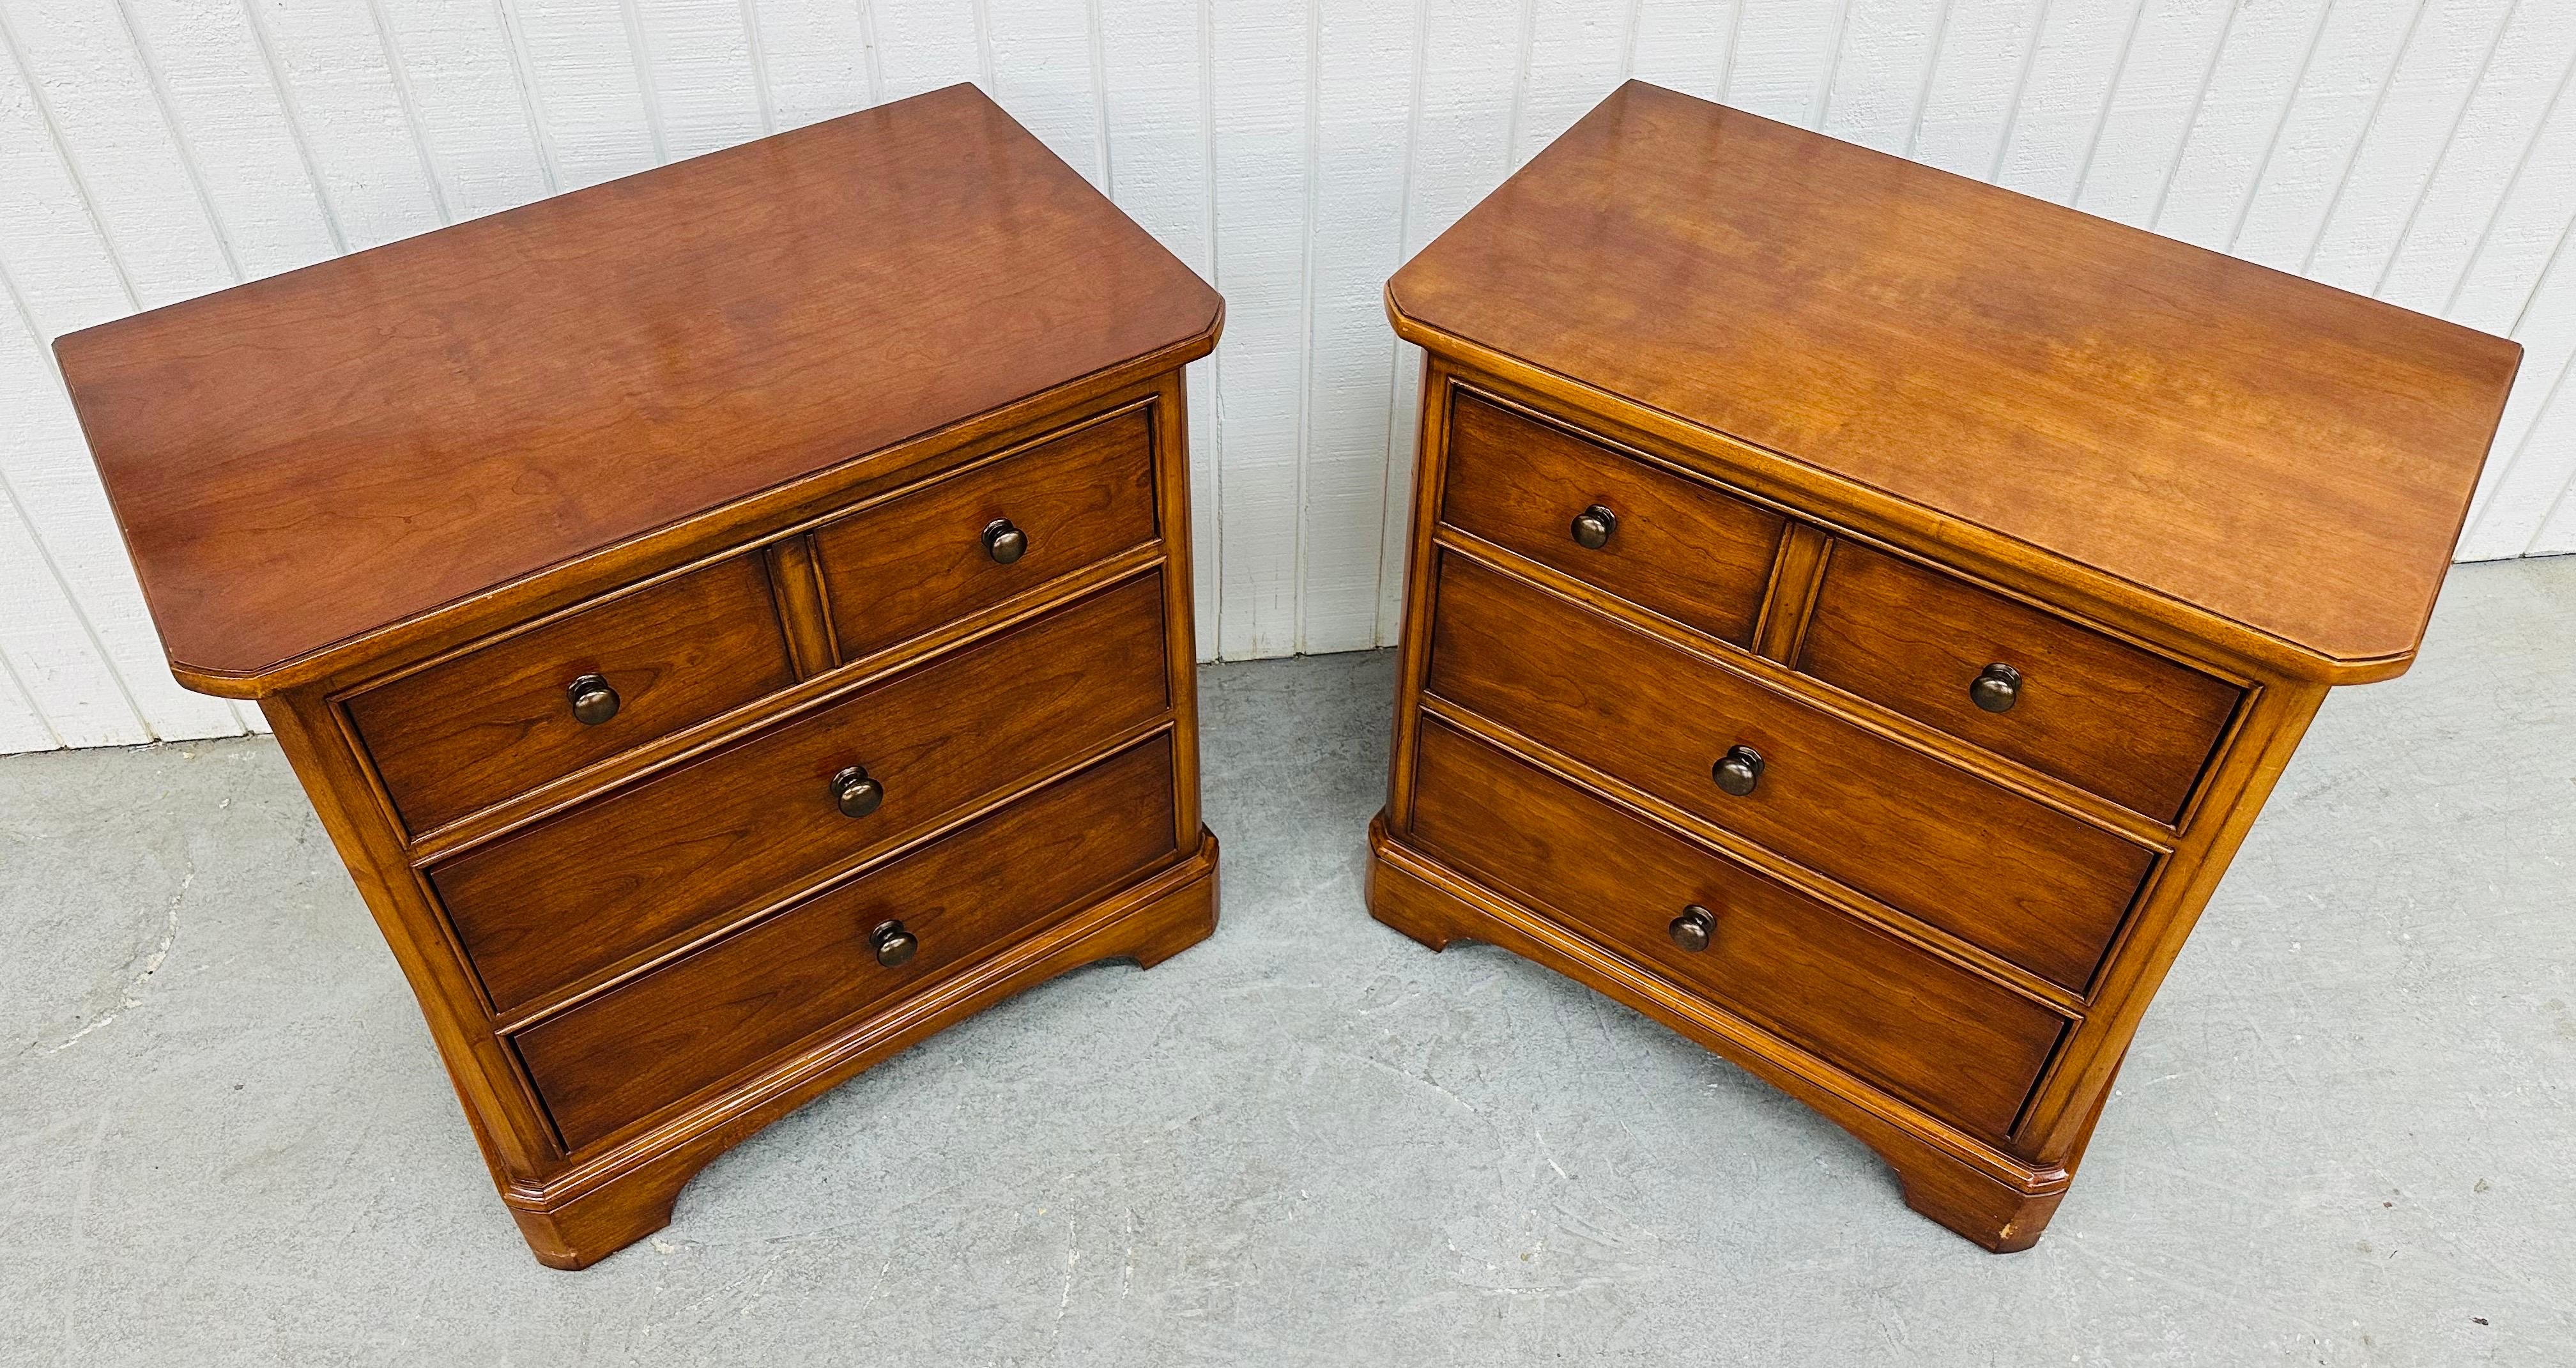 20th Century Vintage Thomasville Cherry Bachelor Chest Nightstands - Set of 2 For Sale